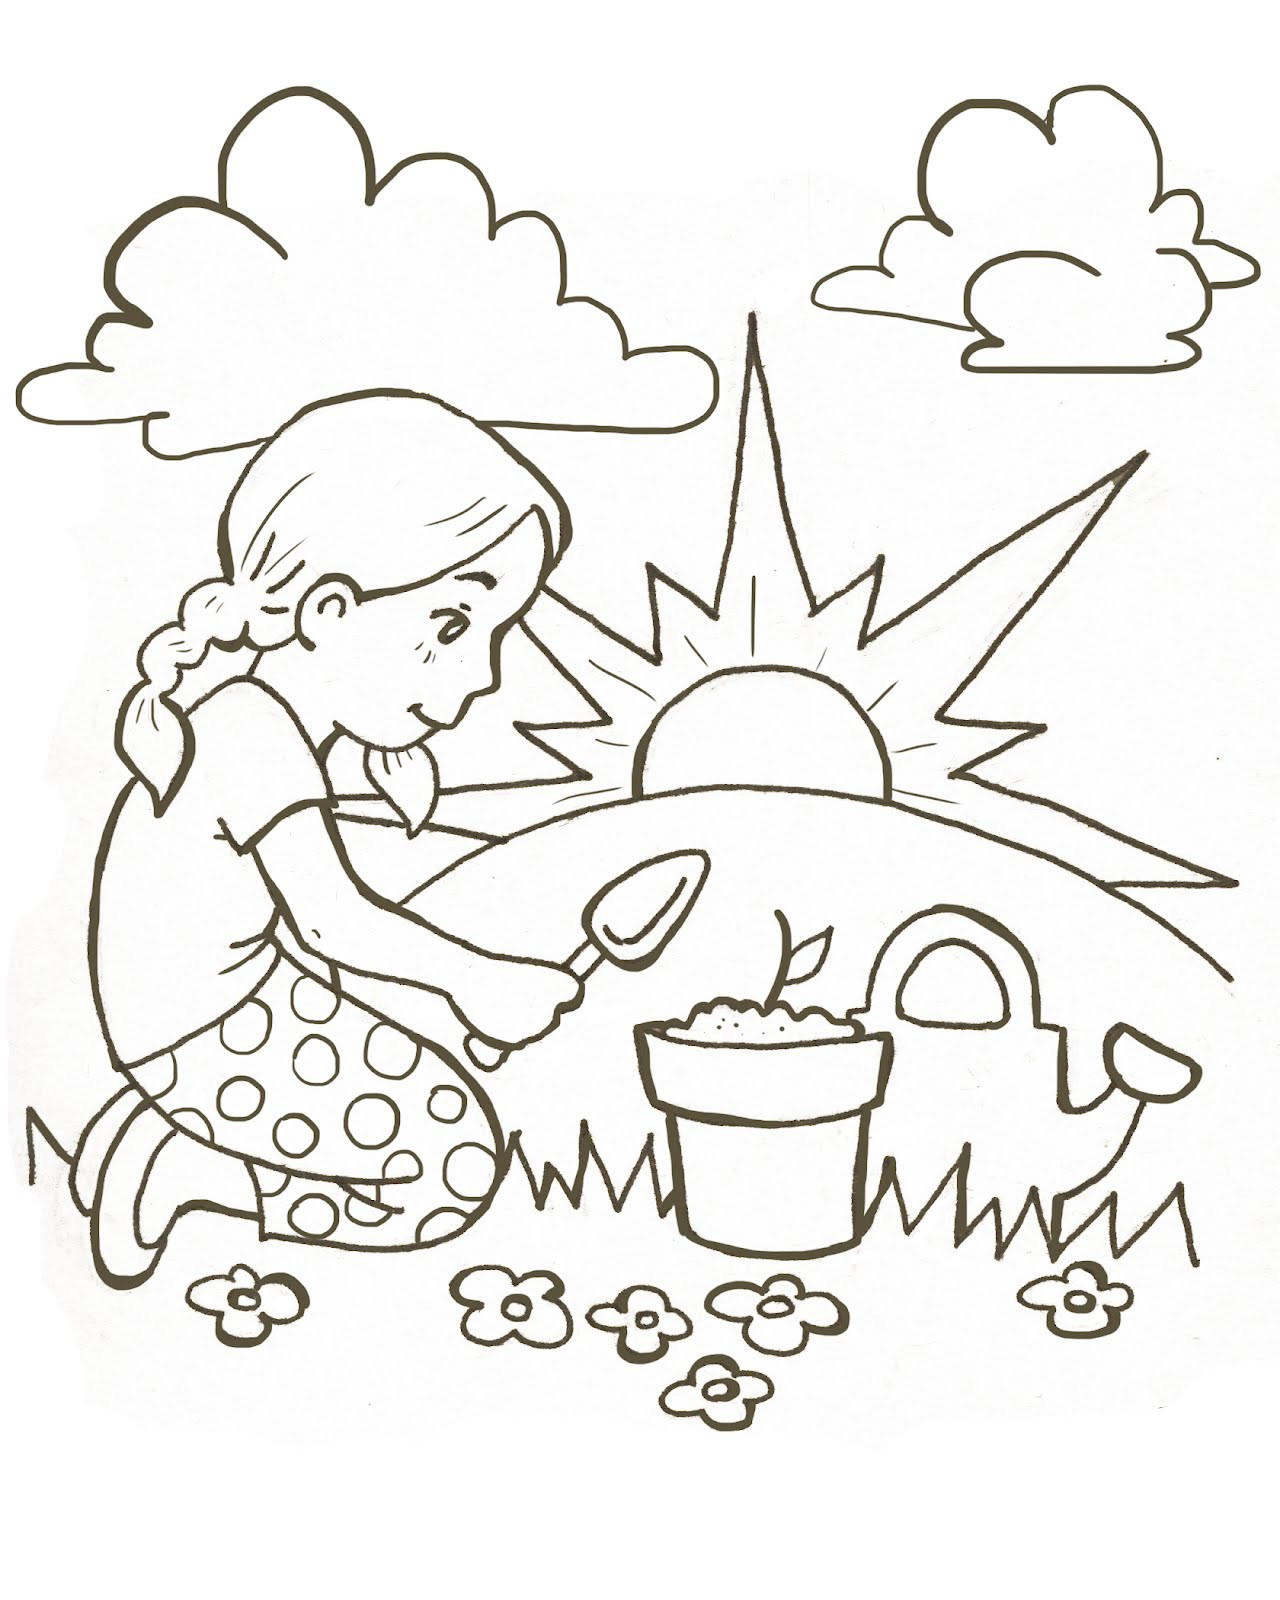 Faith Coloring Pages For Kids
 ILLUSTRATION ALCHEMY LDS Mobile Apps Coloring Pages